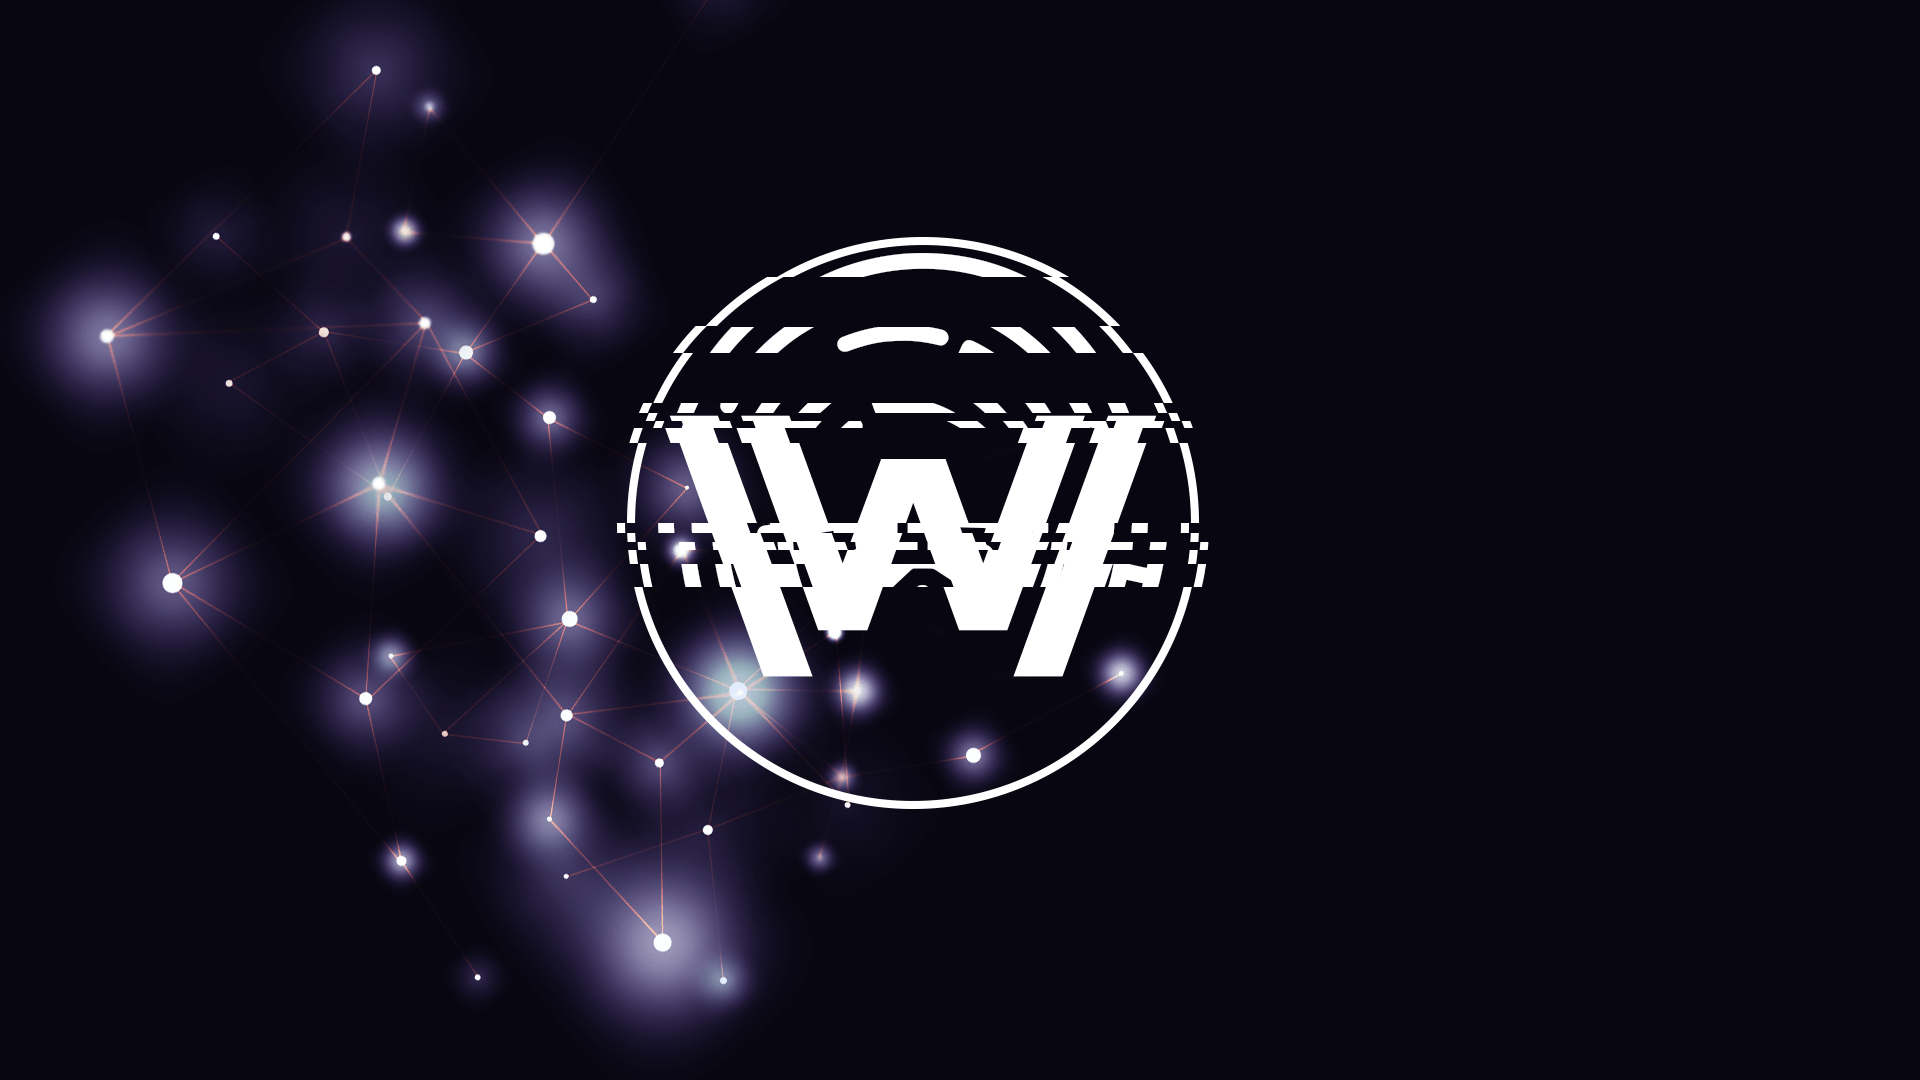 I made a westworld wallpaper, I thought you guys may like it